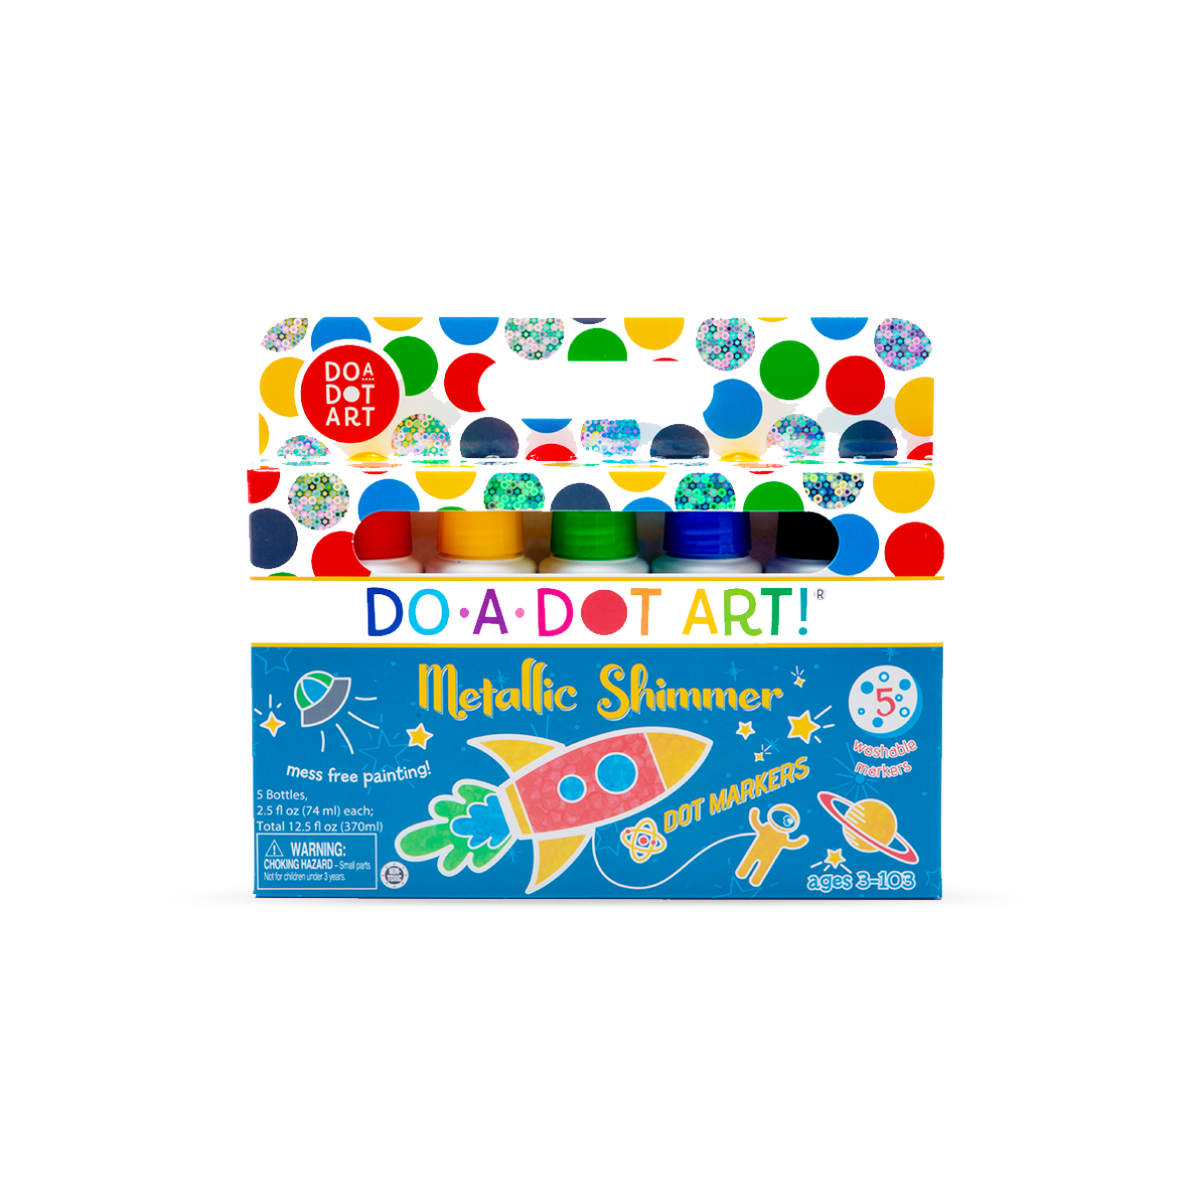 Duotip Washable Markers 12 Pack - Toys & Co. - Creativity For Kids